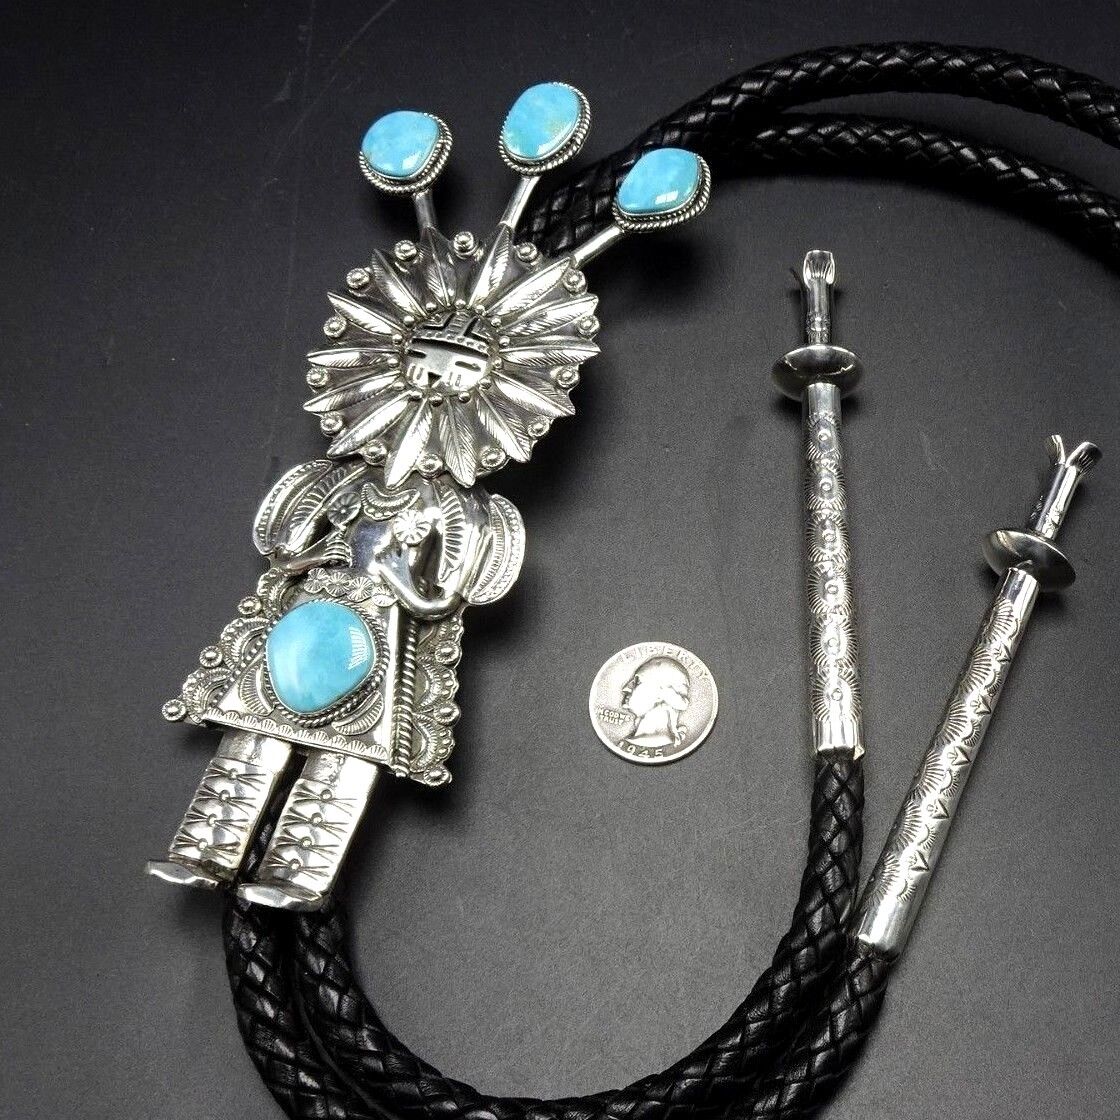 Spectacular NAVAJO Hand Stamped Sterling Silver and TURQUOISE KACHINA BOLO Tie